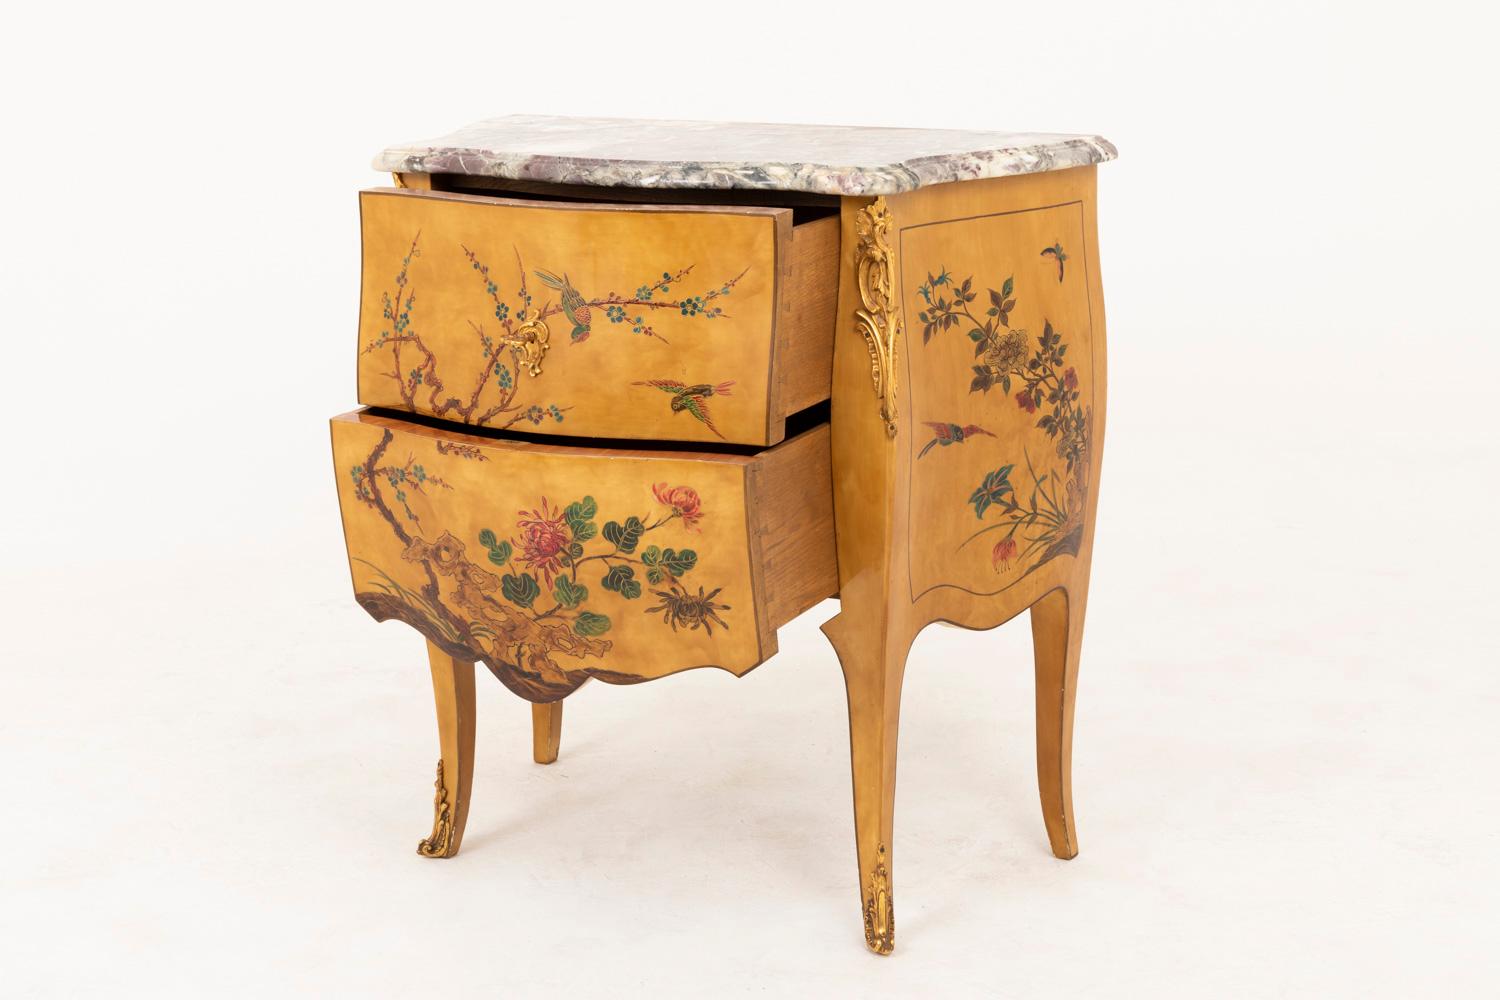 Small Louis XV style Chinese style yellow lacquered commode with a Chinese decor opening with two drawers sans traverse and standing on four console legs. Bulged shaped and scalloped lower crossbar.
In front and framed on side, ornaments on a